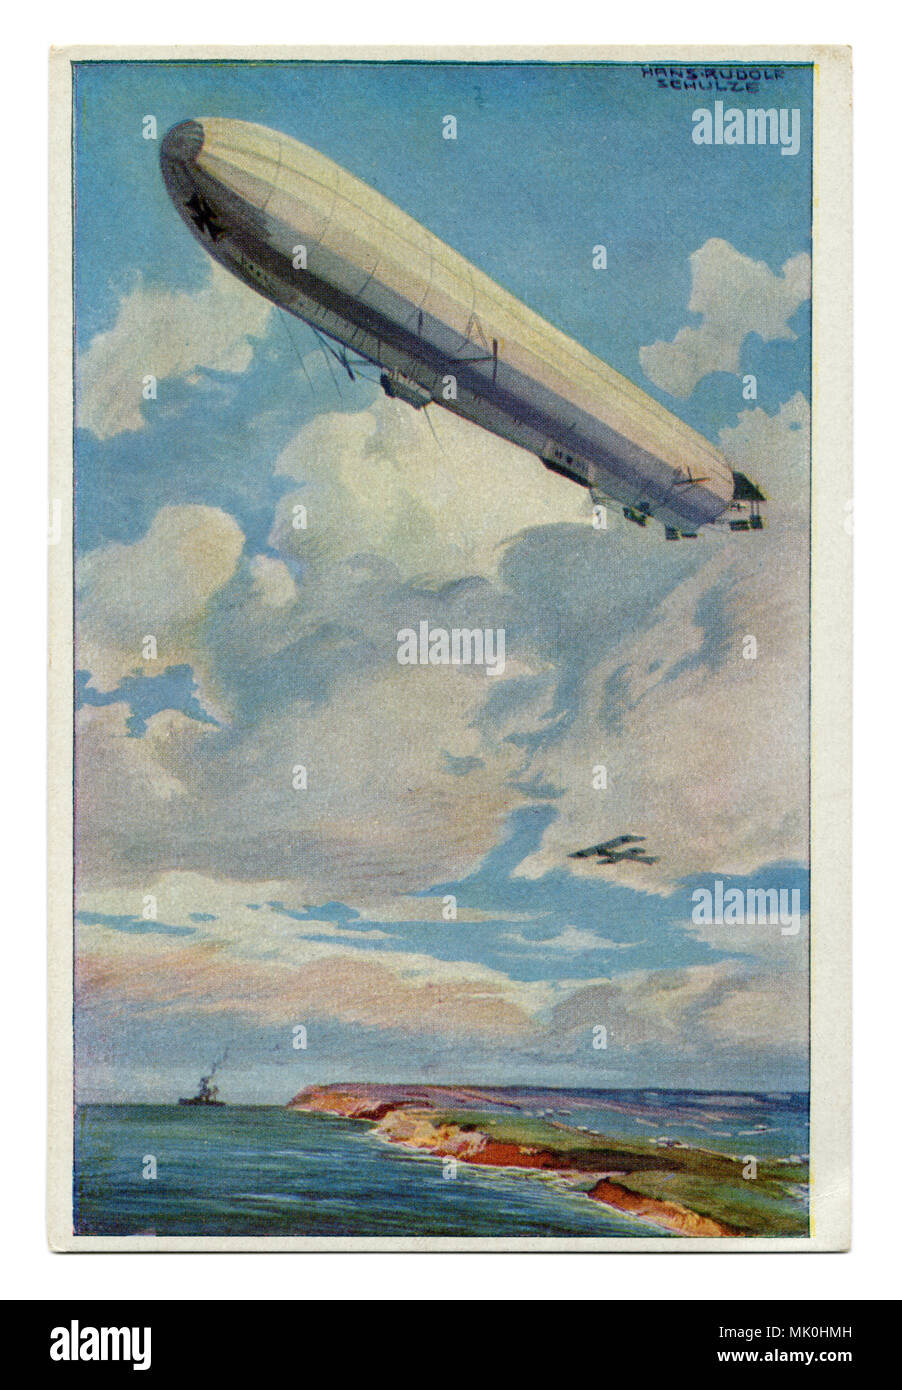 Old German postcard: A huge Zeppelin airship flies over the coast of the sea against the background of a warship and aircraft, first world war 1914-18 Stock Photo